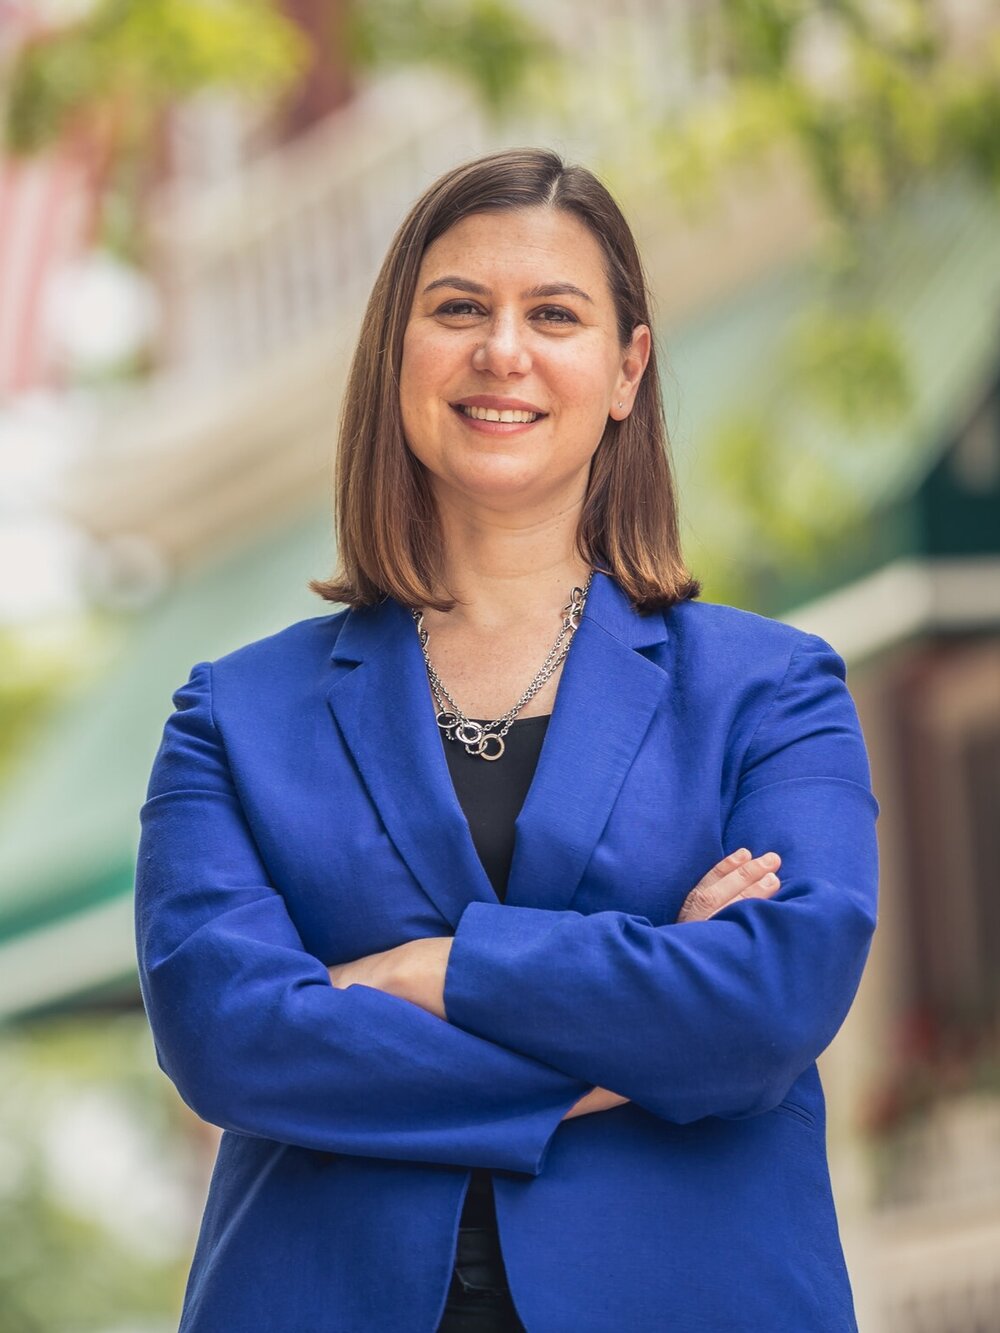 Endorsed candidate - Rep. Elissa Slotkin — FP Action Network